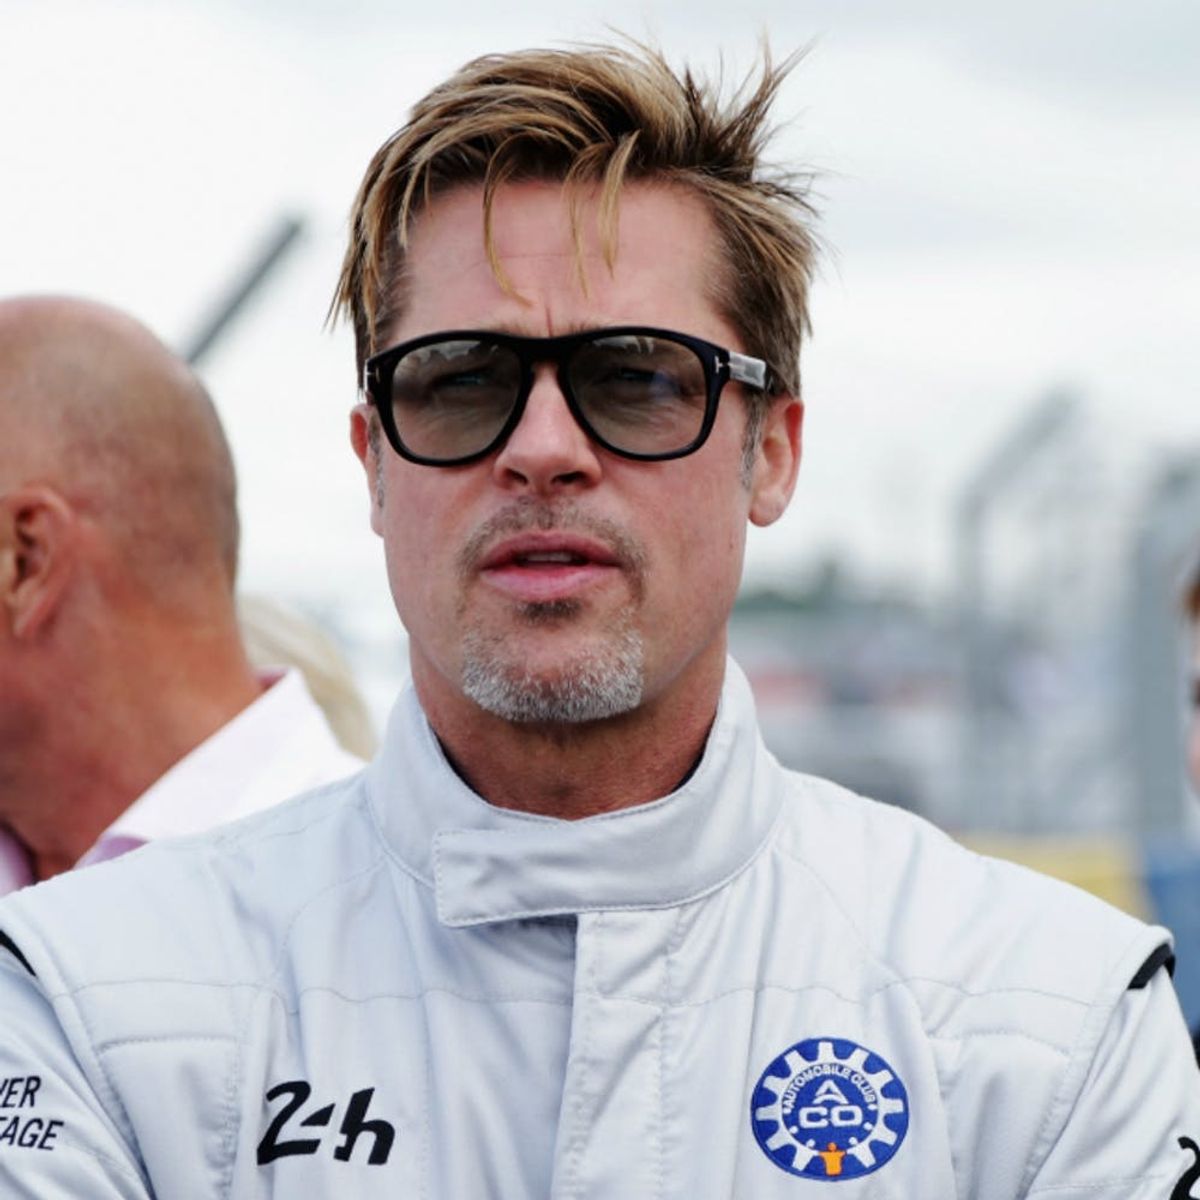 Brad Pitt’s Alleged Child Abuse Case Has Been Extended